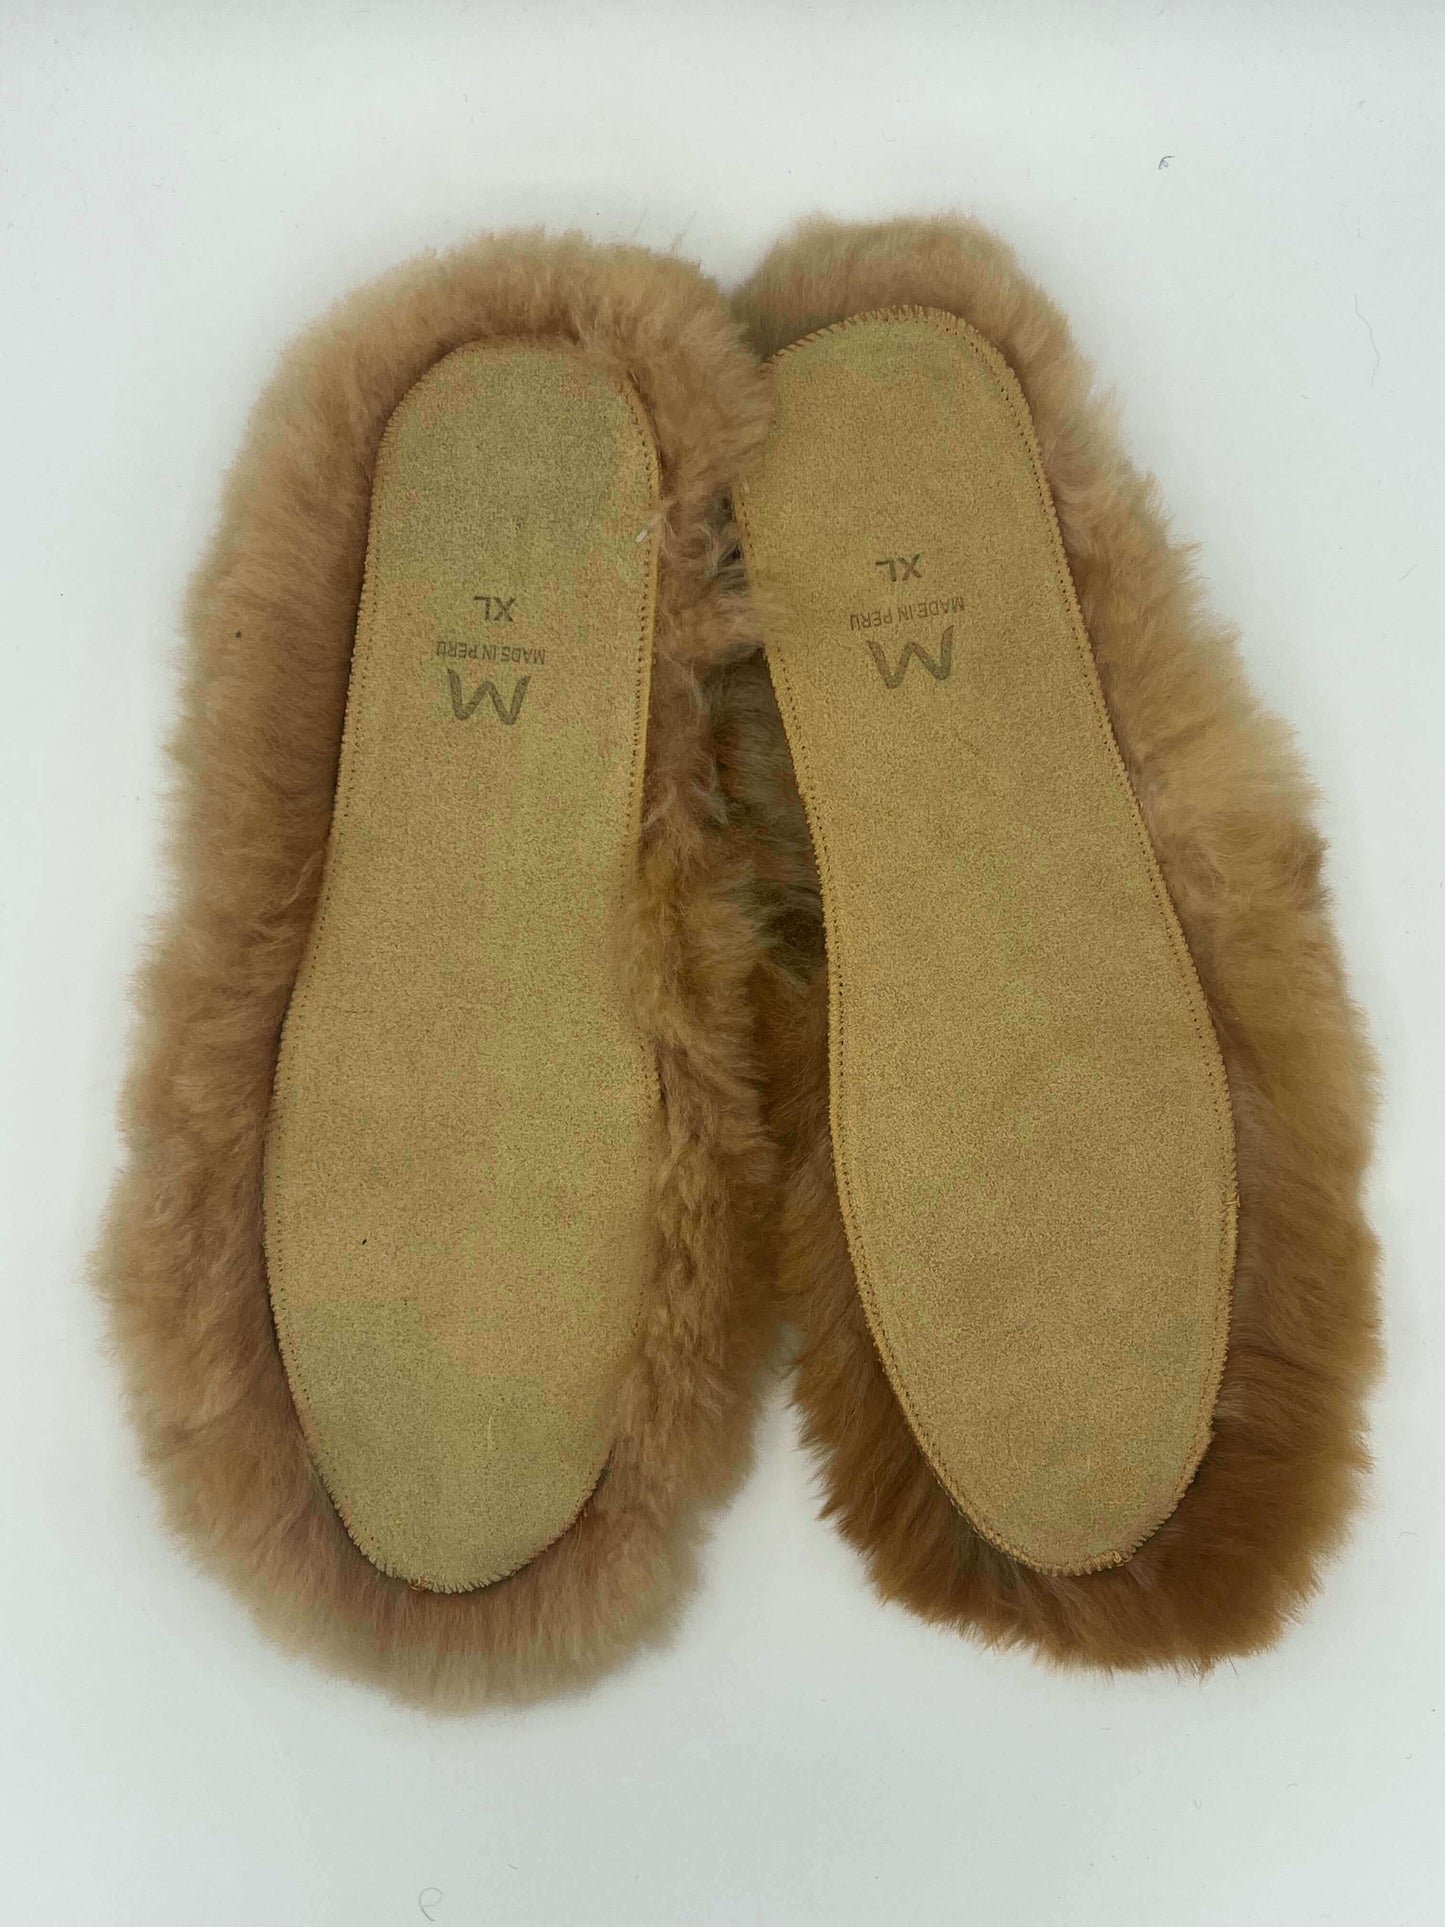 Thermal insulating insoles made from 100% baby alpaca wool With suede backing for winter resistance | Available in sizes S-XL